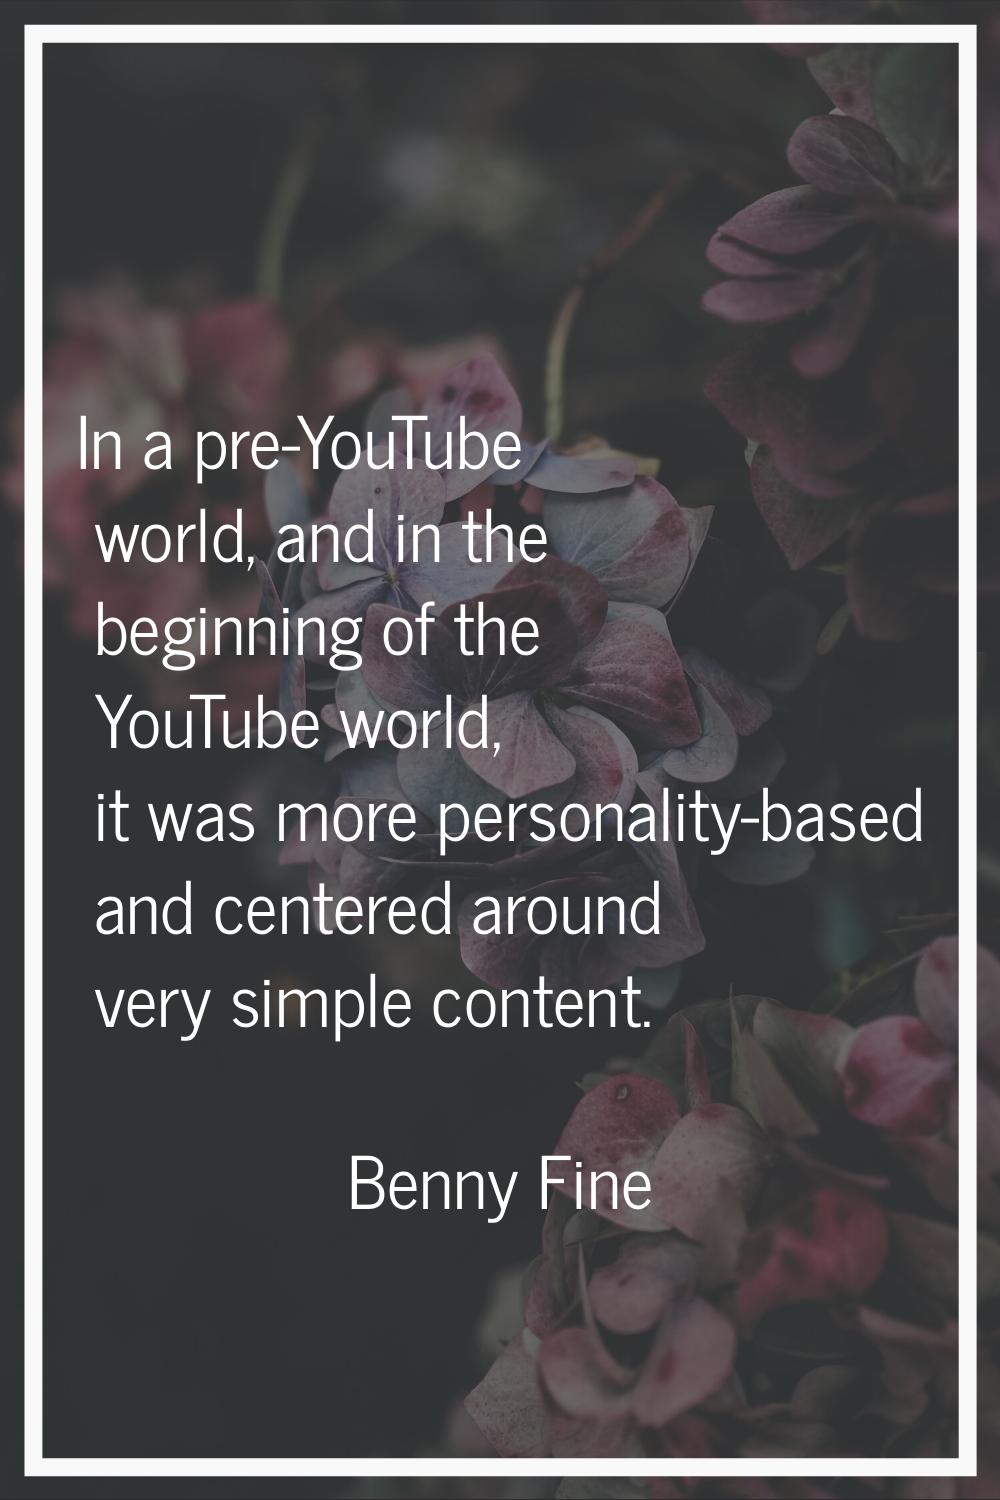 In a pre-YouTube world, and in the beginning of the YouTube world, it was more personality-based an